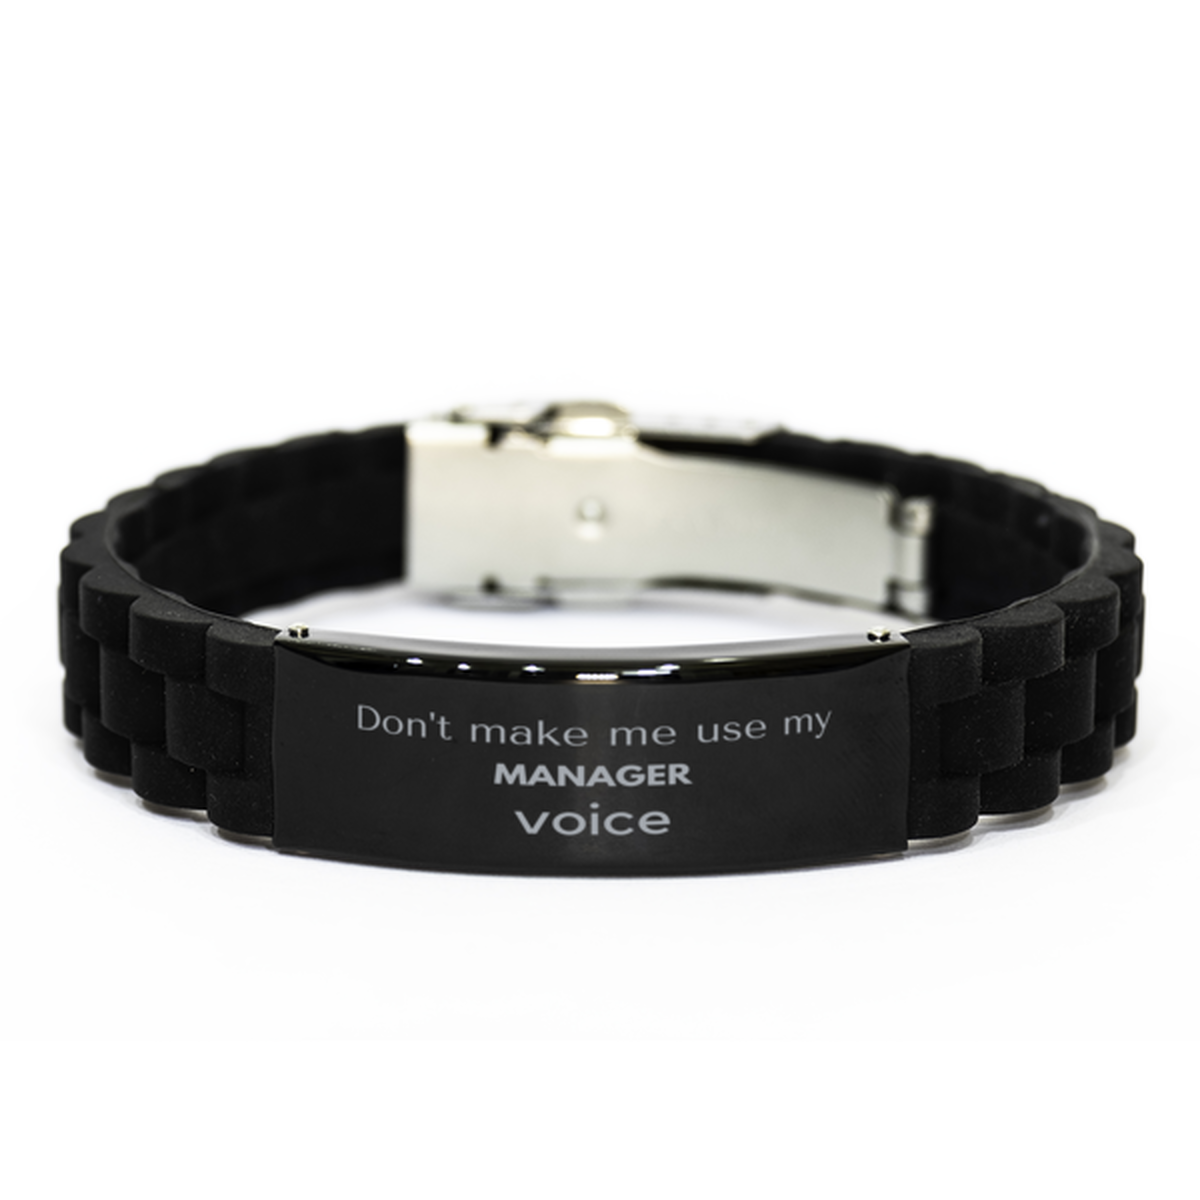 Don't make me use my Manager voice, Sarcasm Manager Gifts, Christmas Manager Black Glidelock Clasp Bracelet Birthday Unique Gifts For Manager Coworkers, Men, Women, Colleague, Friends